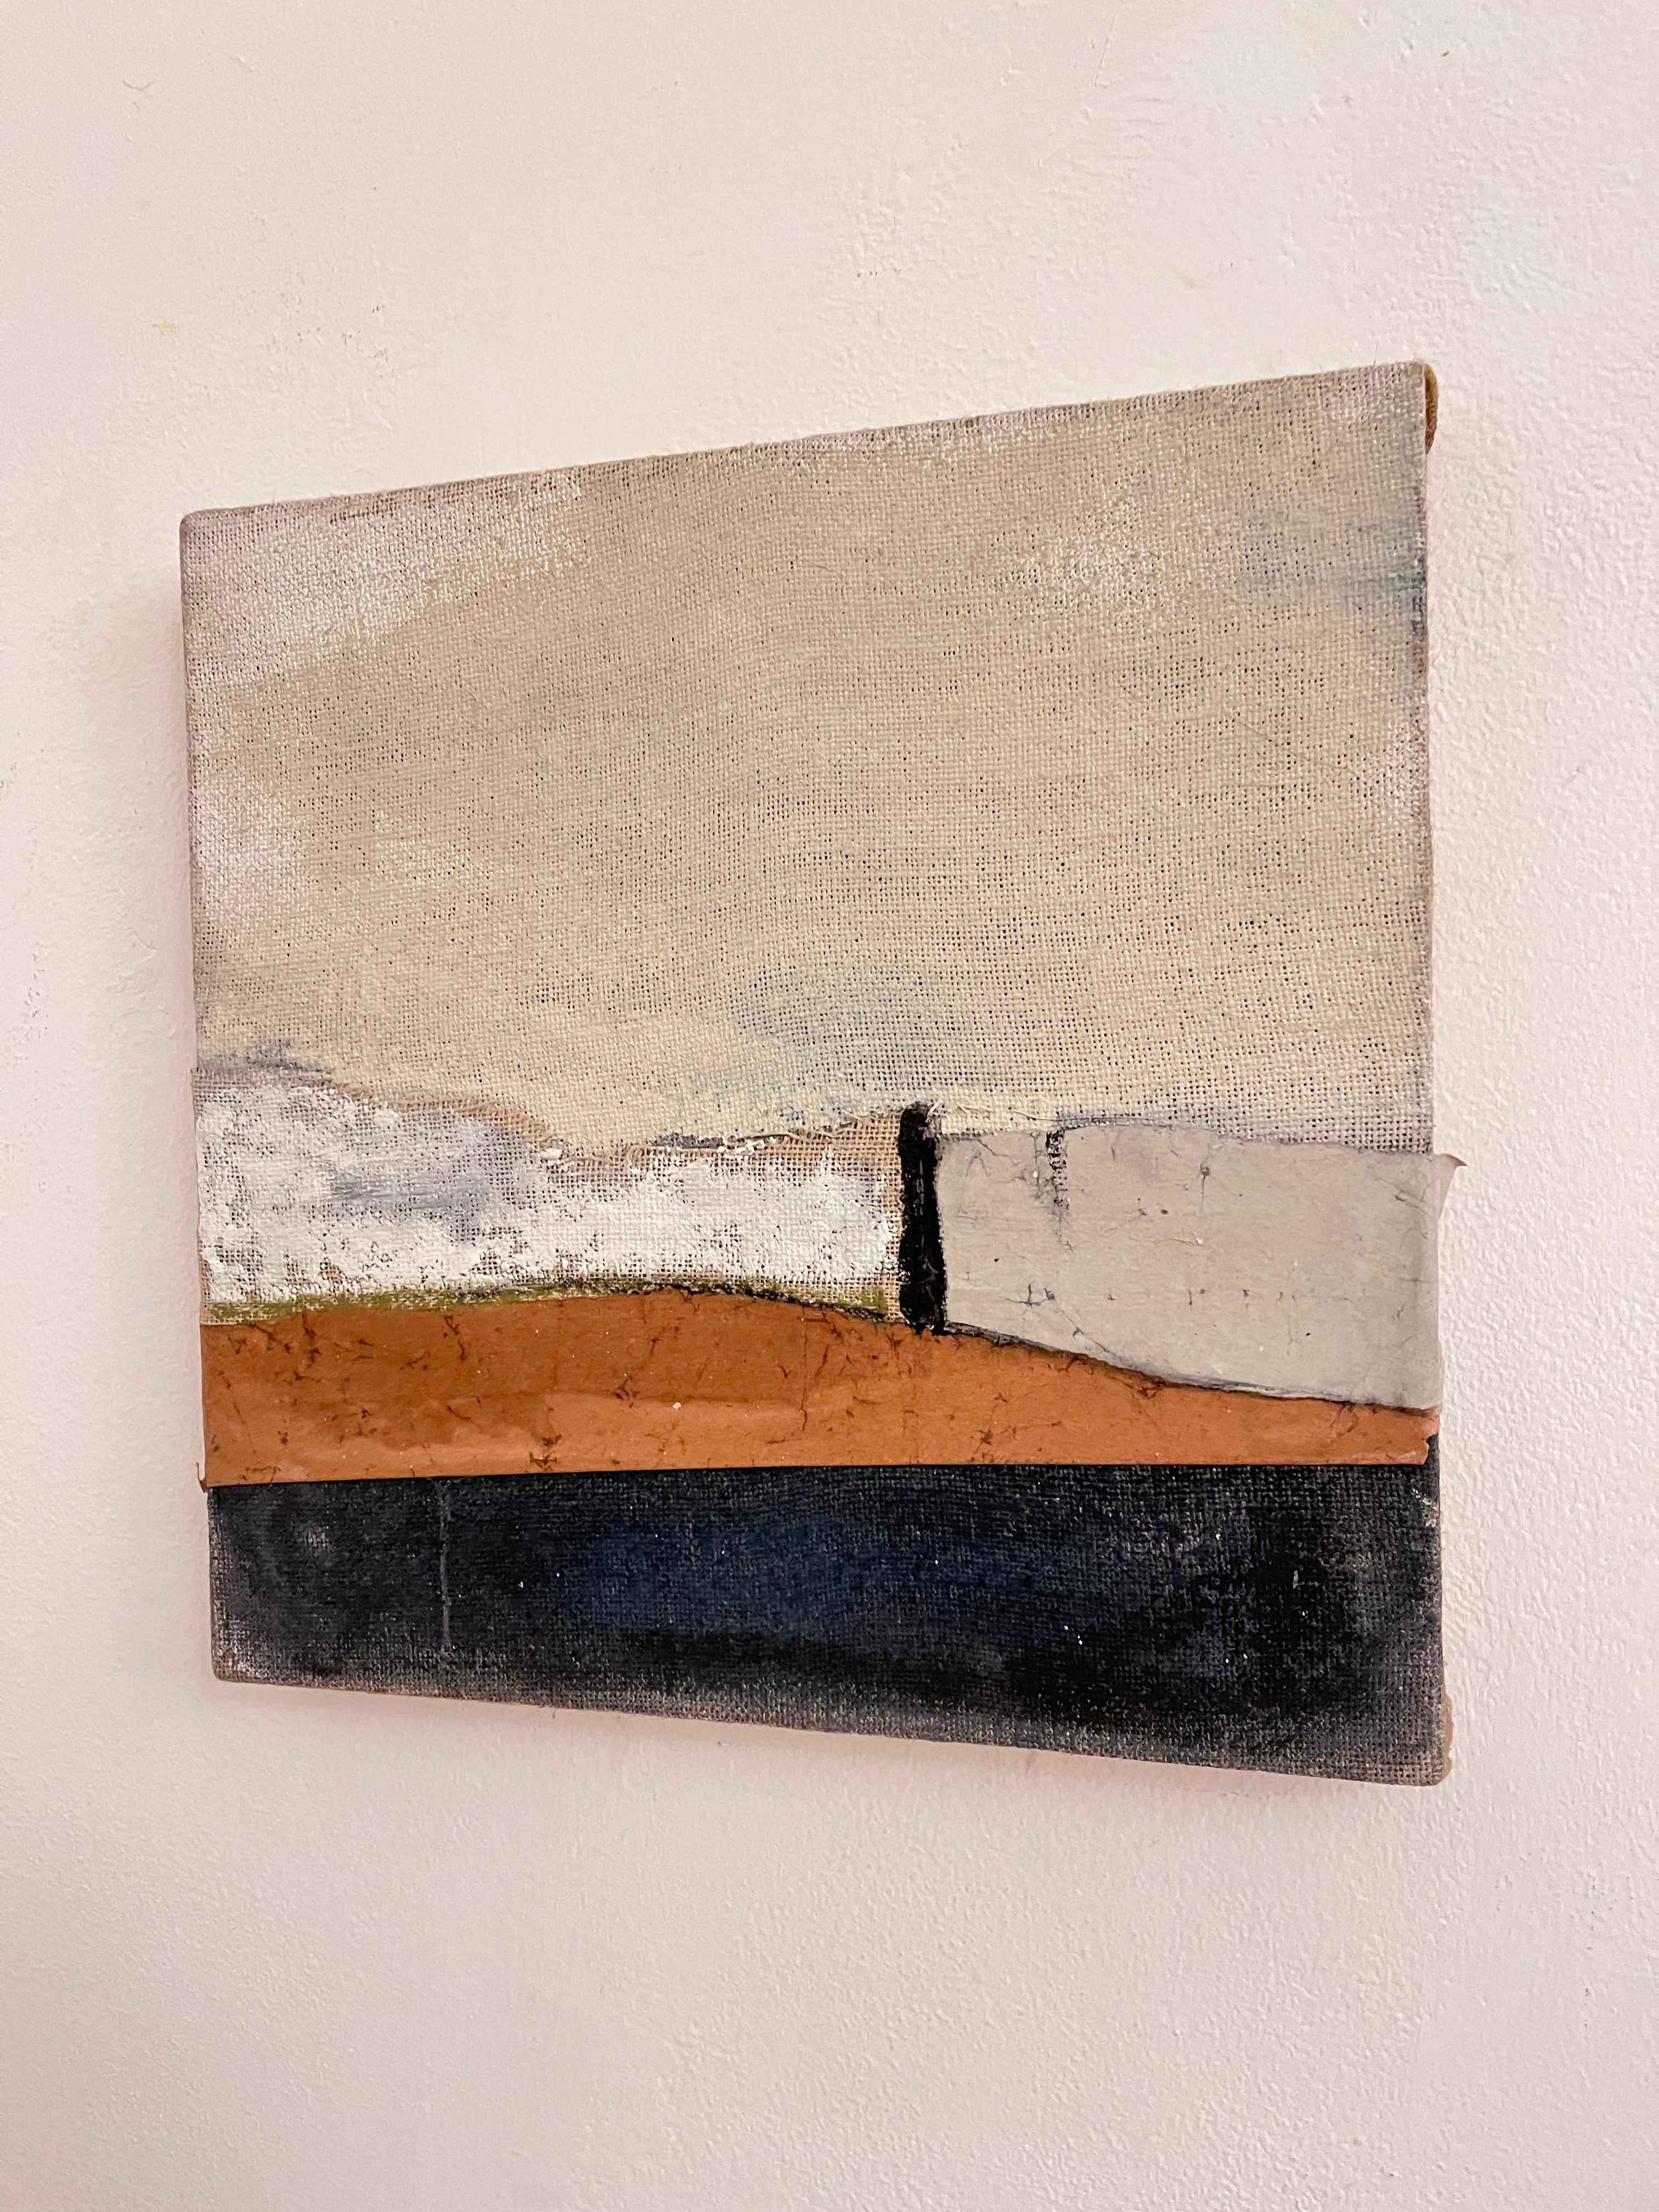 PaperLandscape
mixed media on juta canvas
50x50
2017

the painting is part of the Paper Landscape series
I like to call them fragile landscapes
the title PaperLandscape, but also wants to focus on the theme of landscape protection and care
these are